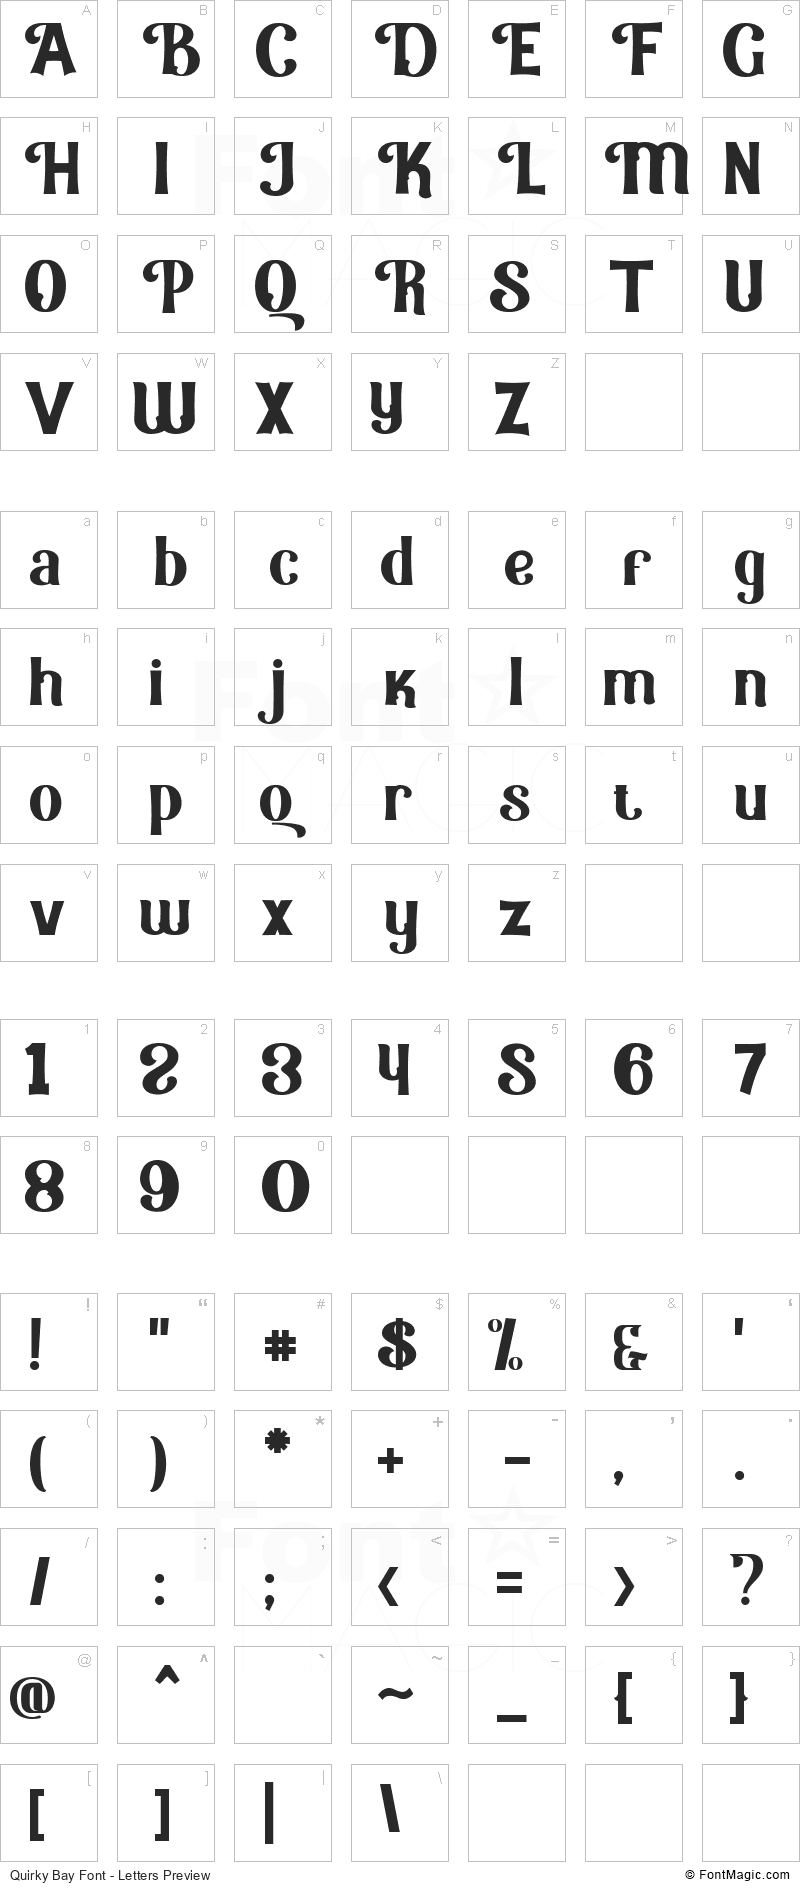 Quirky Bay Font - All Latters Preview Chart